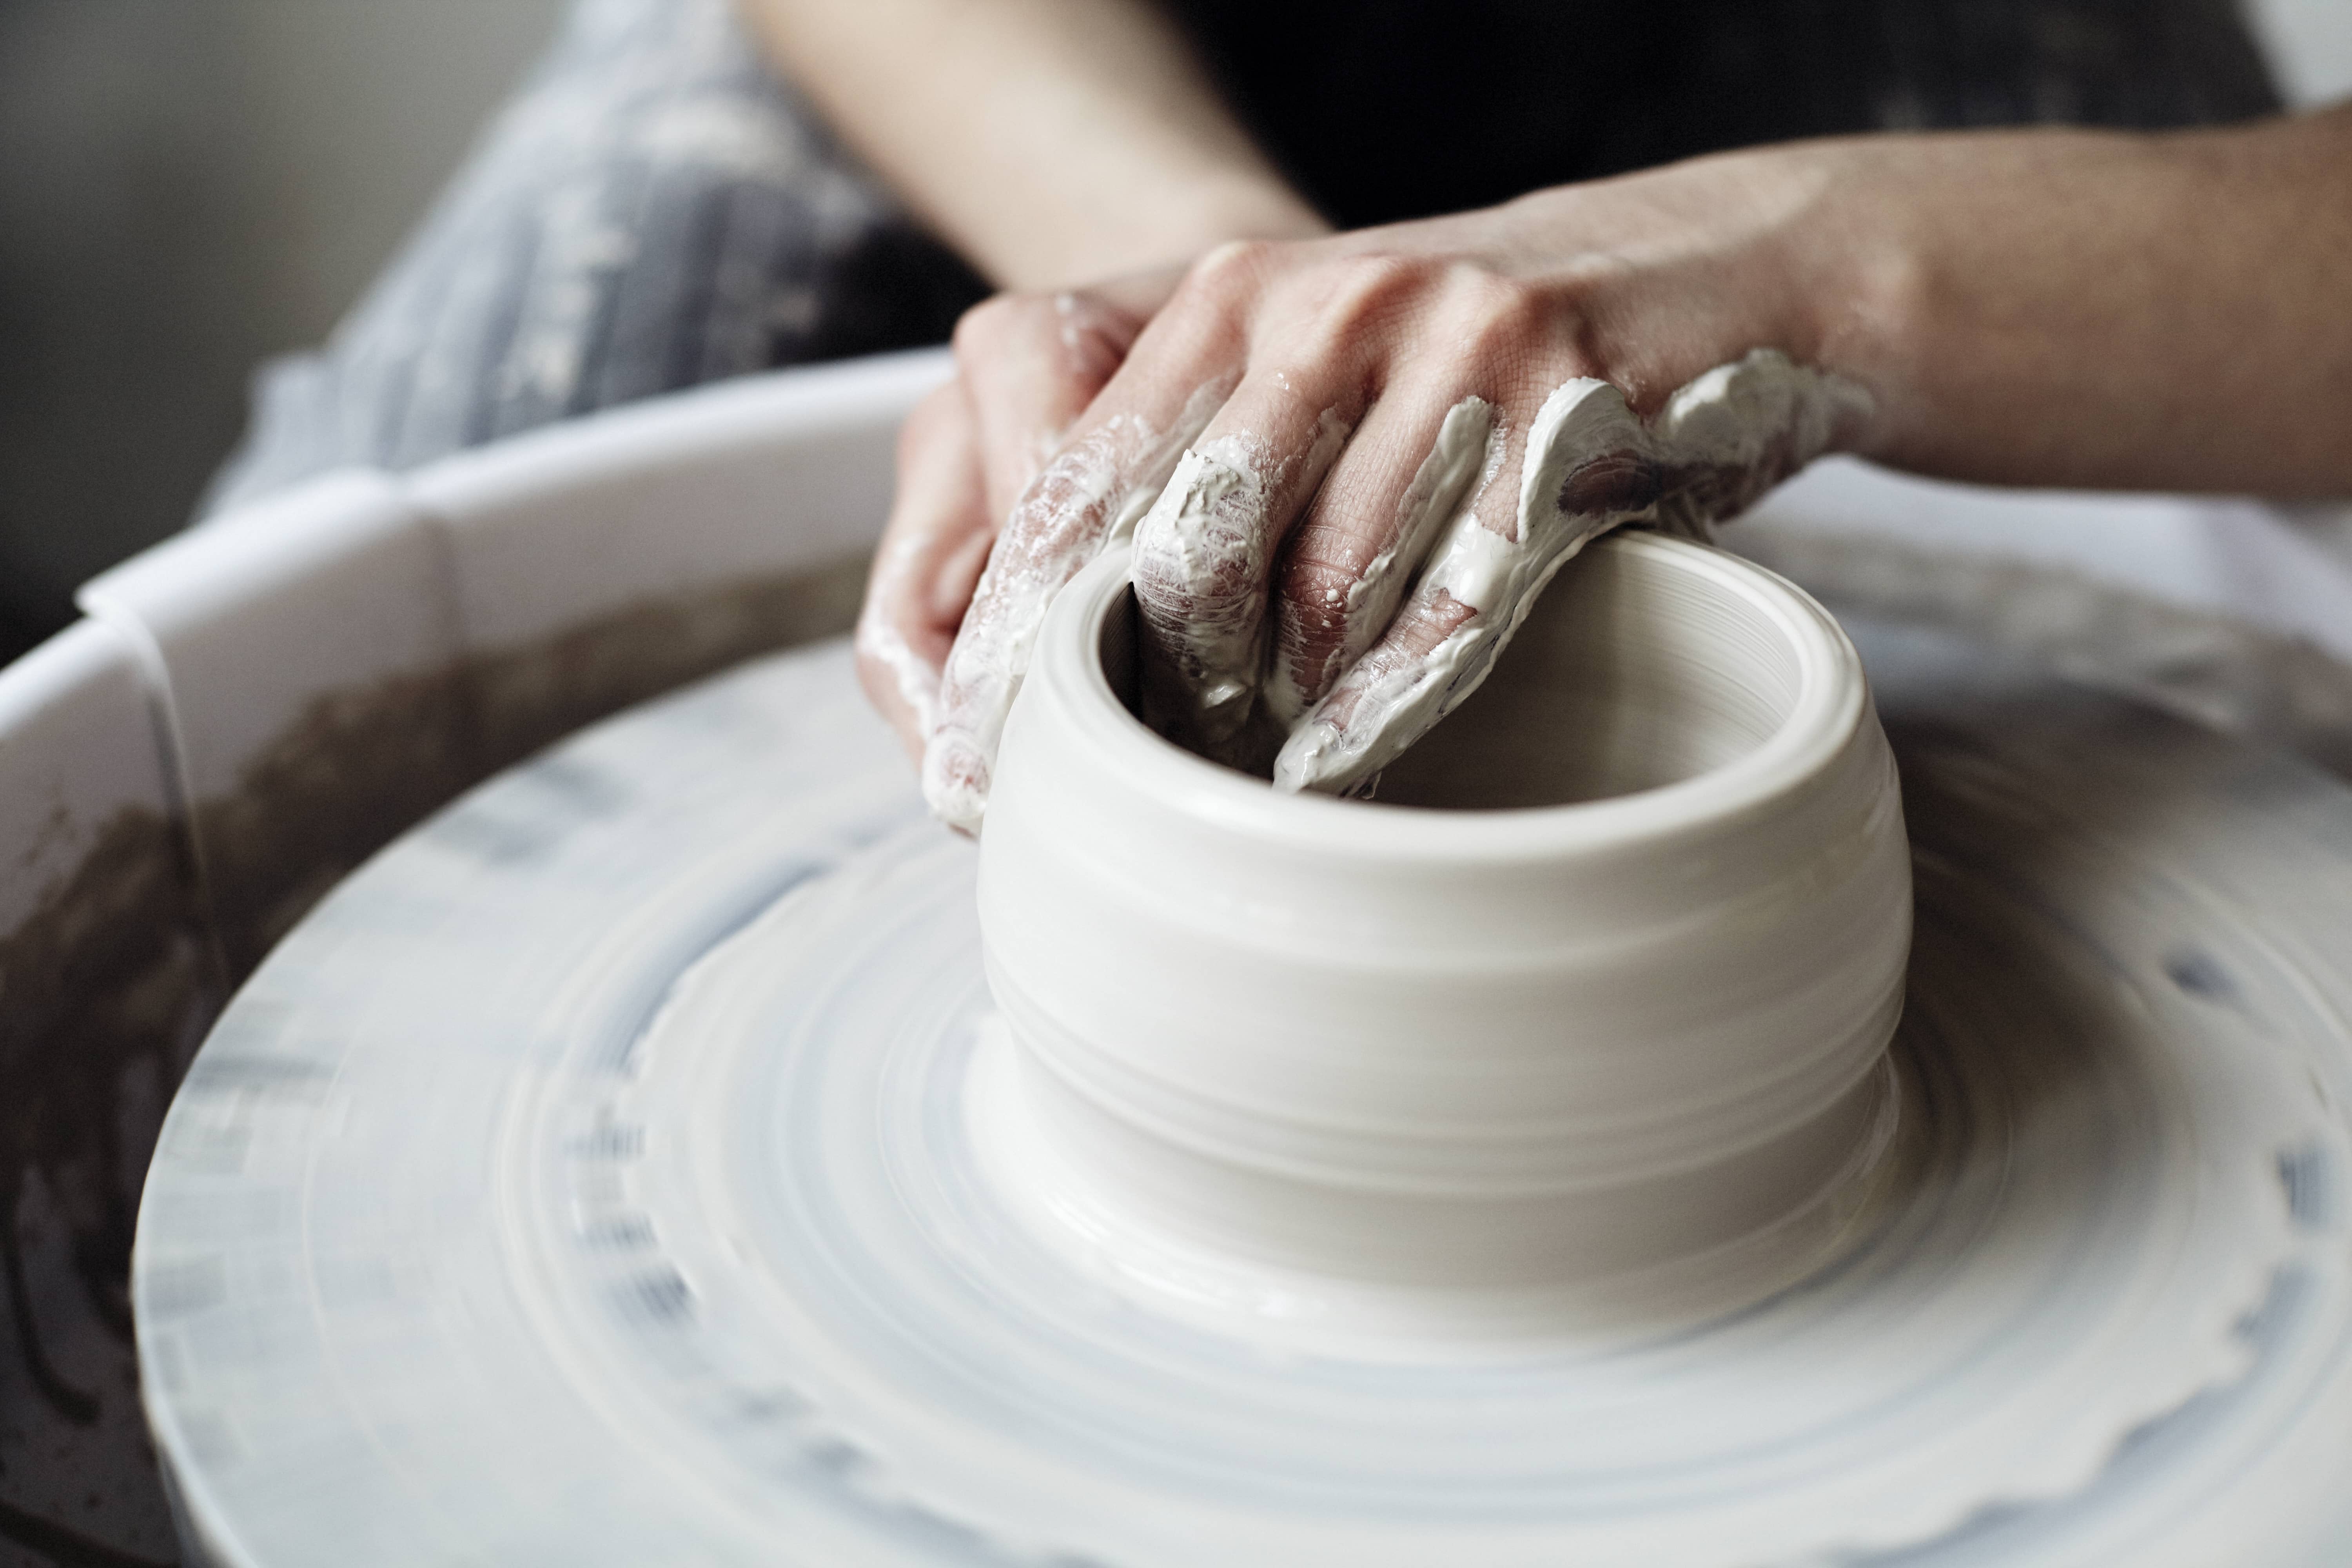 Being mindful with inner peace means being present as if we're sculpting pottery with love and full attention..